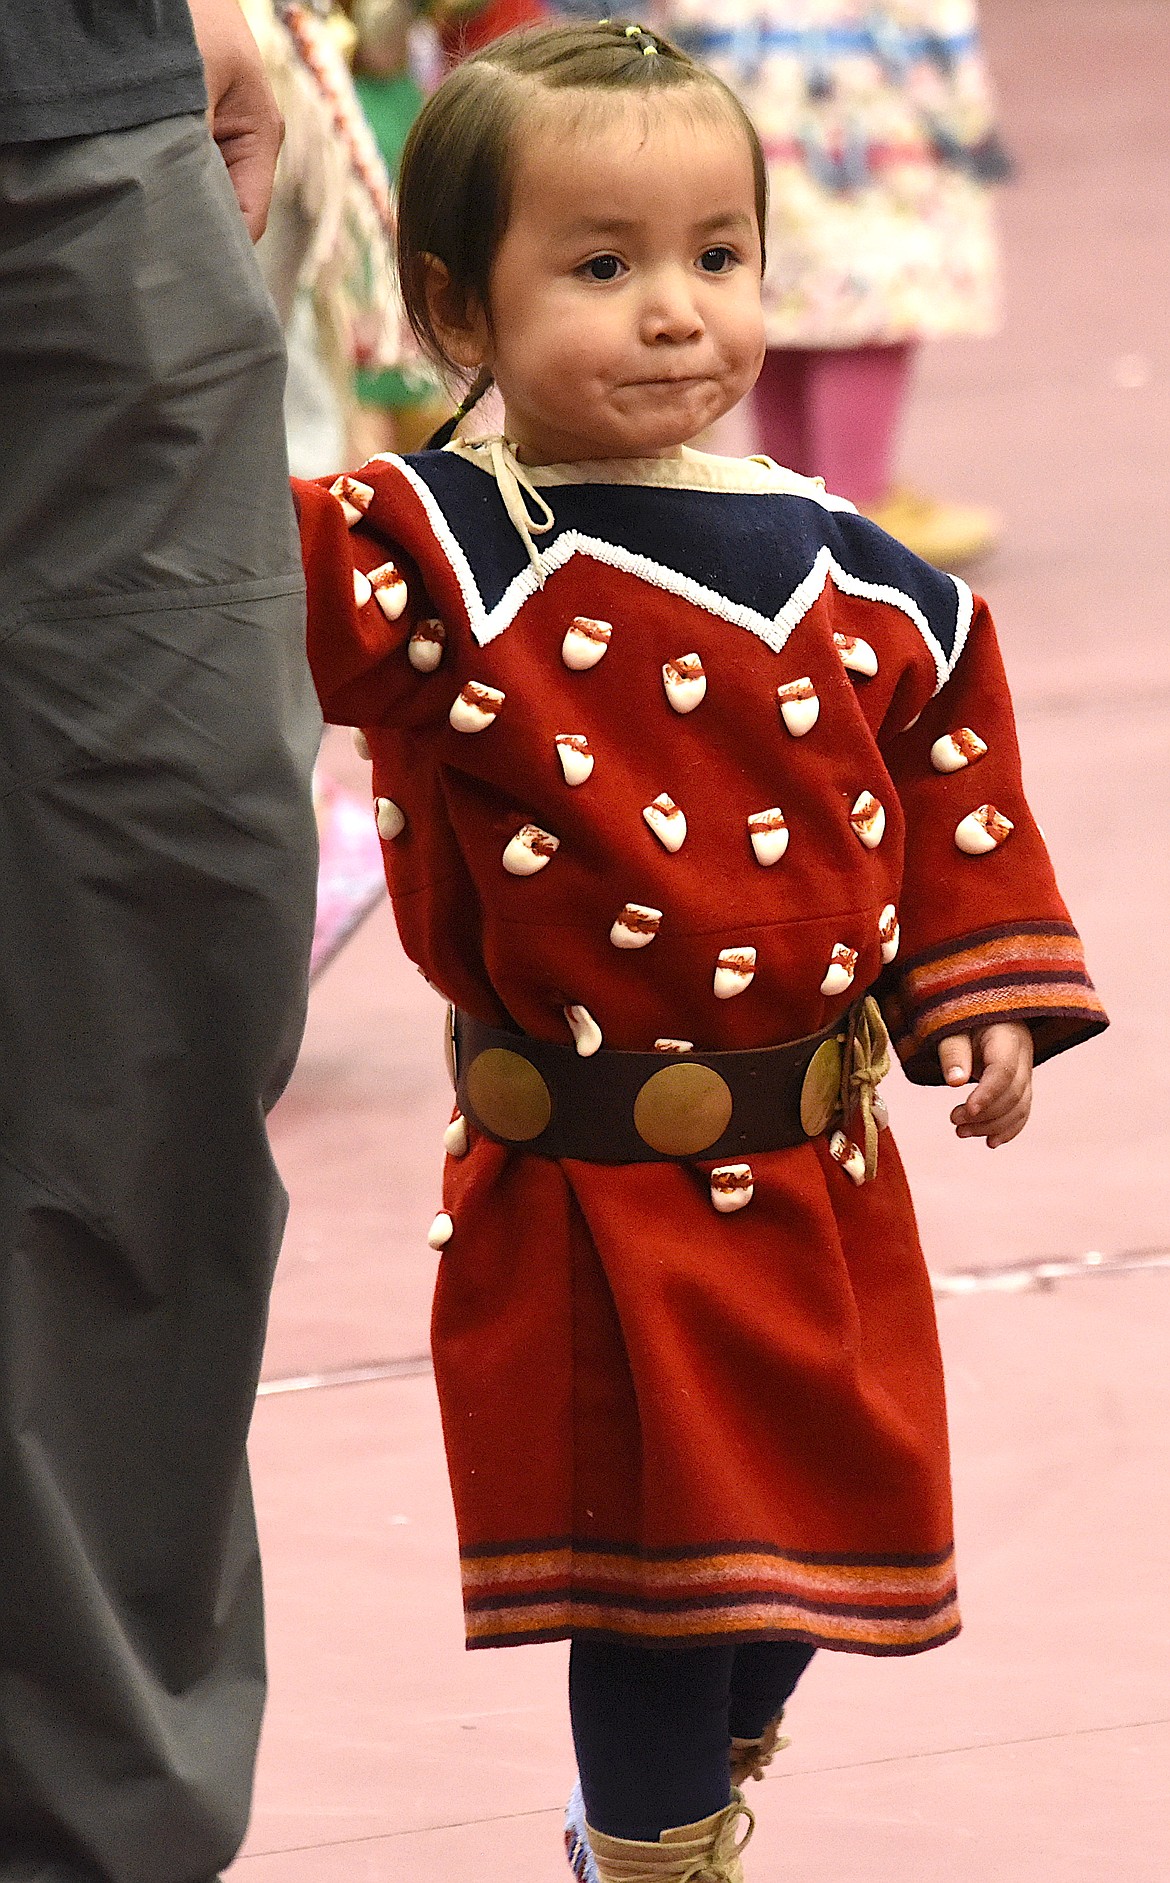 Participating in the Tiny Tots dance, this young lady is pretty serious about the whole event. (Berl Tiskus/Leader)